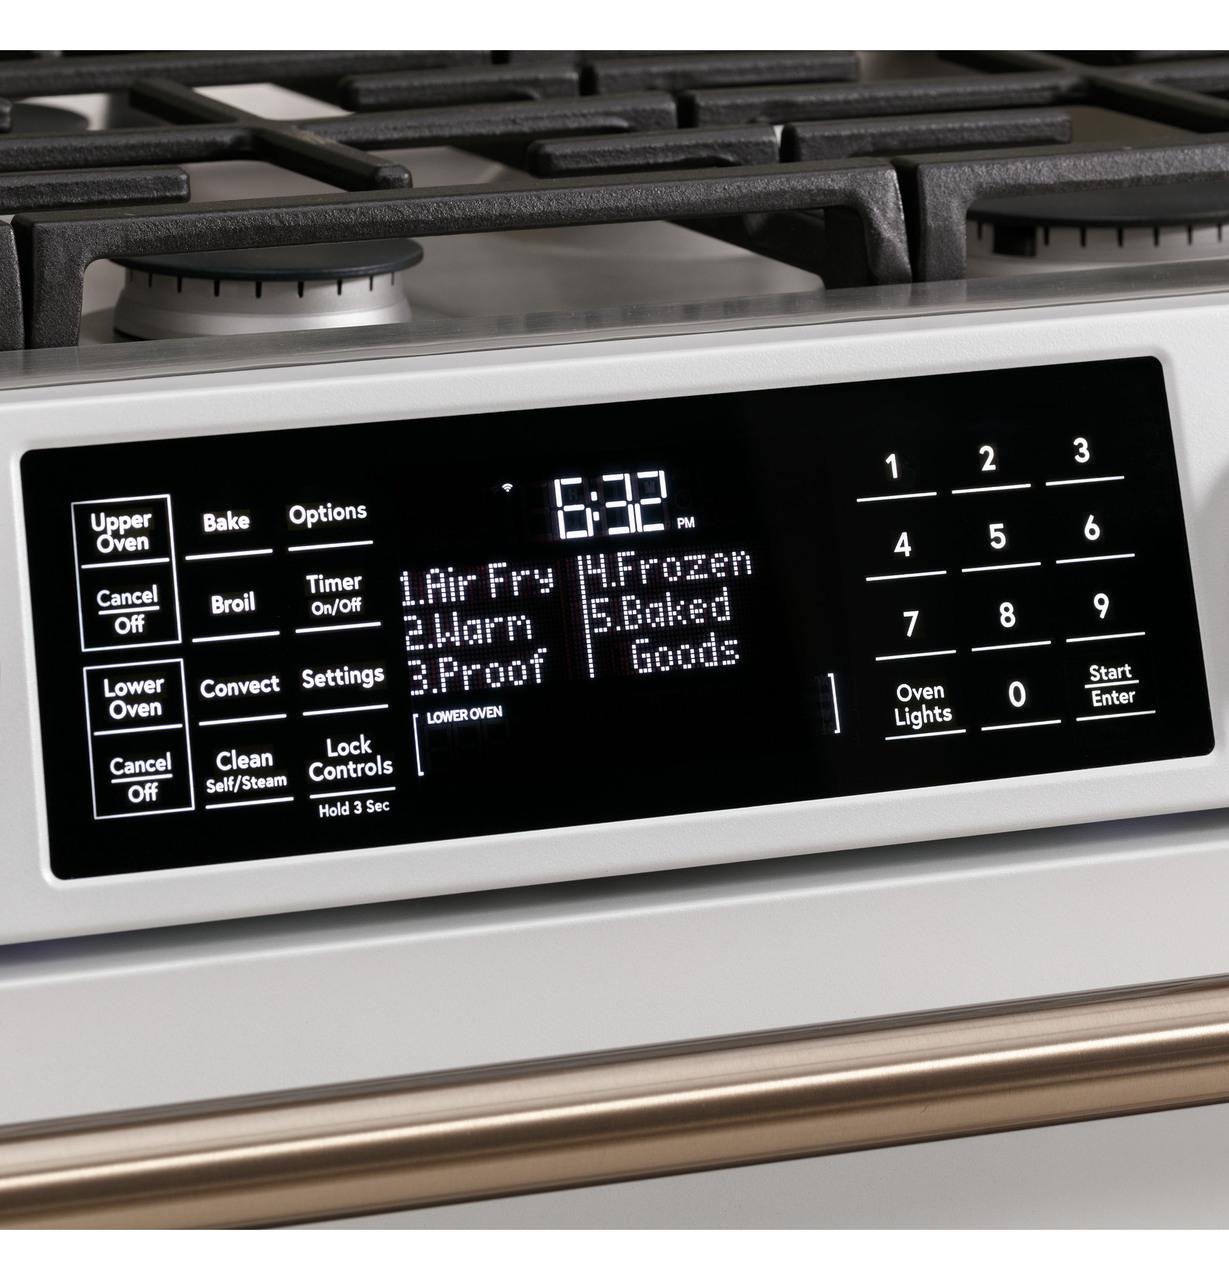 Cafe Caf(eback)™ 30" Smart Slide-In, Front-Control, Dual-Fuel, Double-Oven Range with Convection